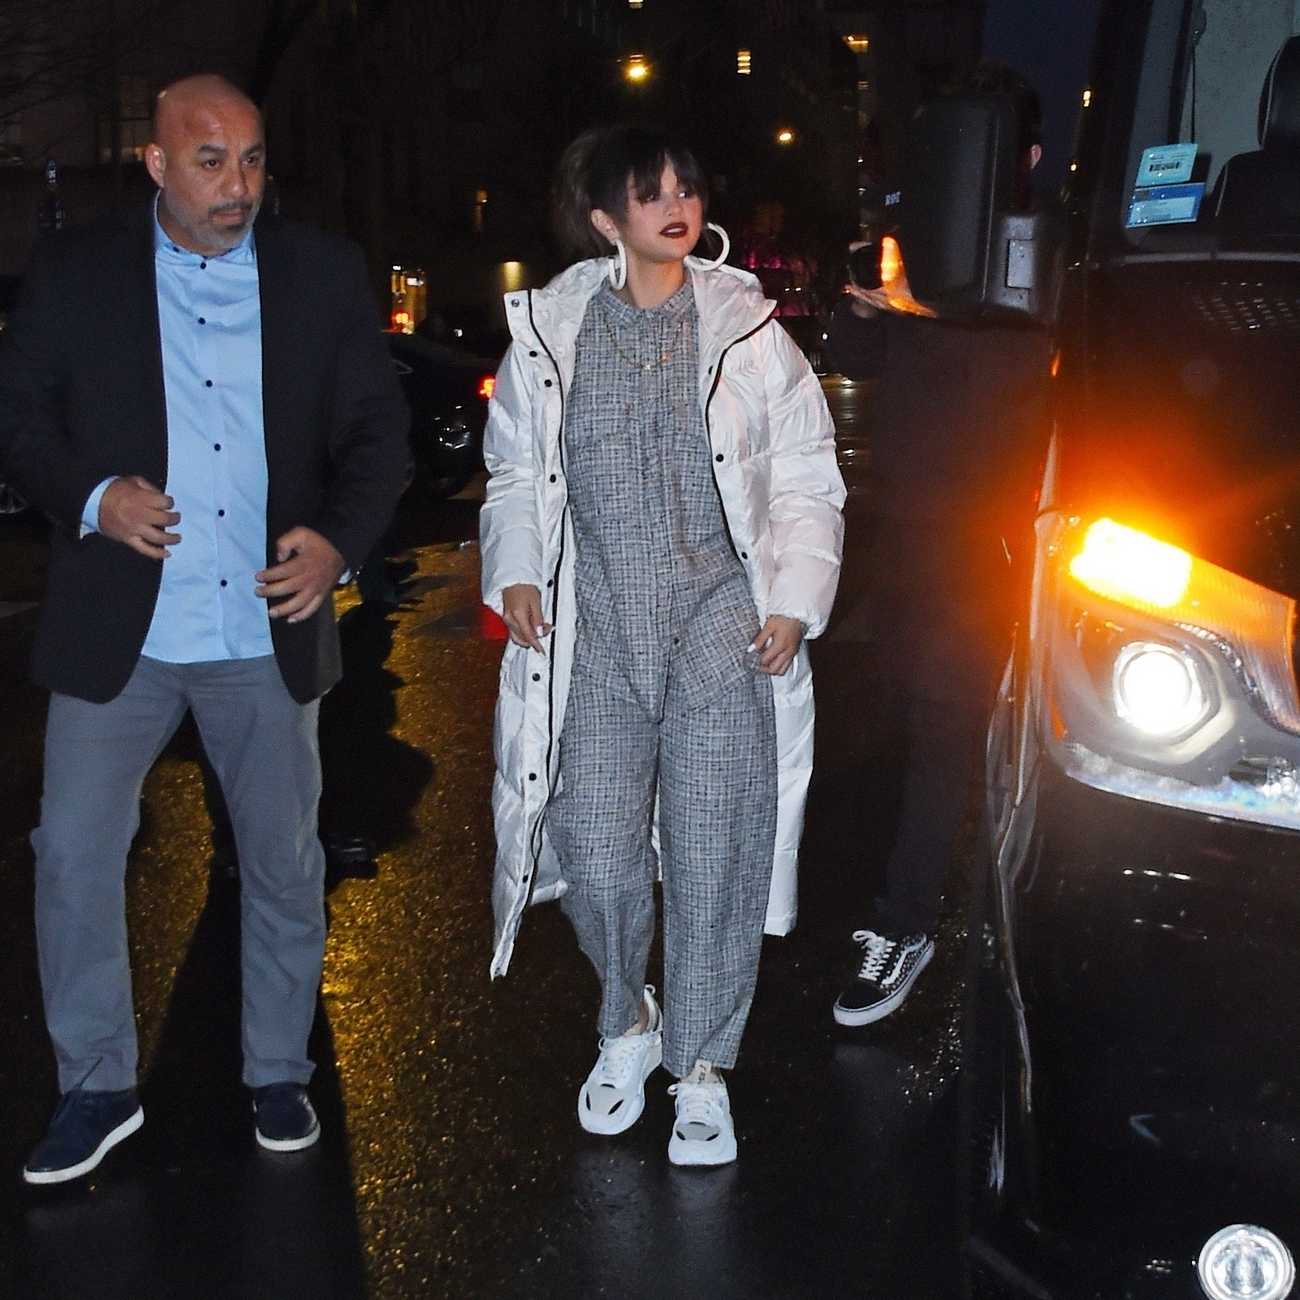 Selena_Gomez_-_arrives_at_her__Rare__album_release_party_at_the_Puma_Flagship_store_in_New_York2C_01142020-02.jpg